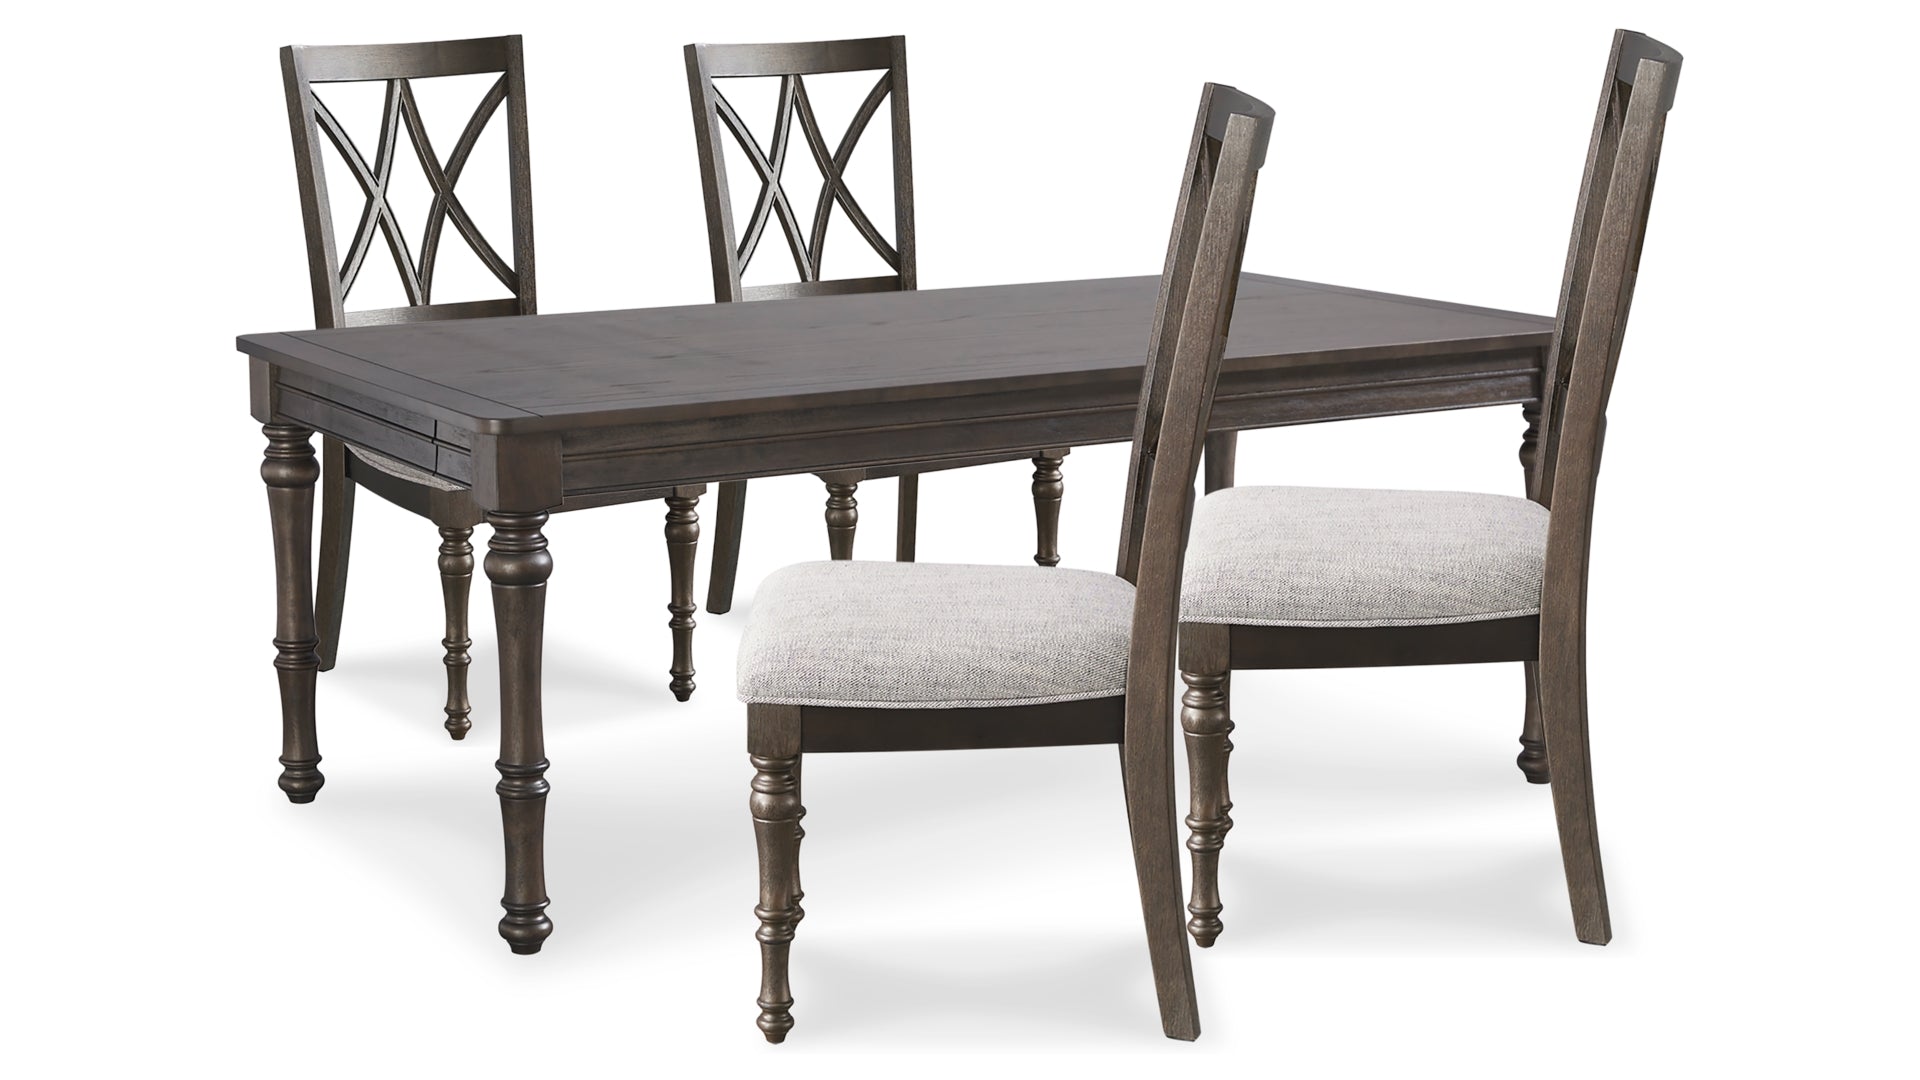 Lanceyard Dining Table and 4 Chairs